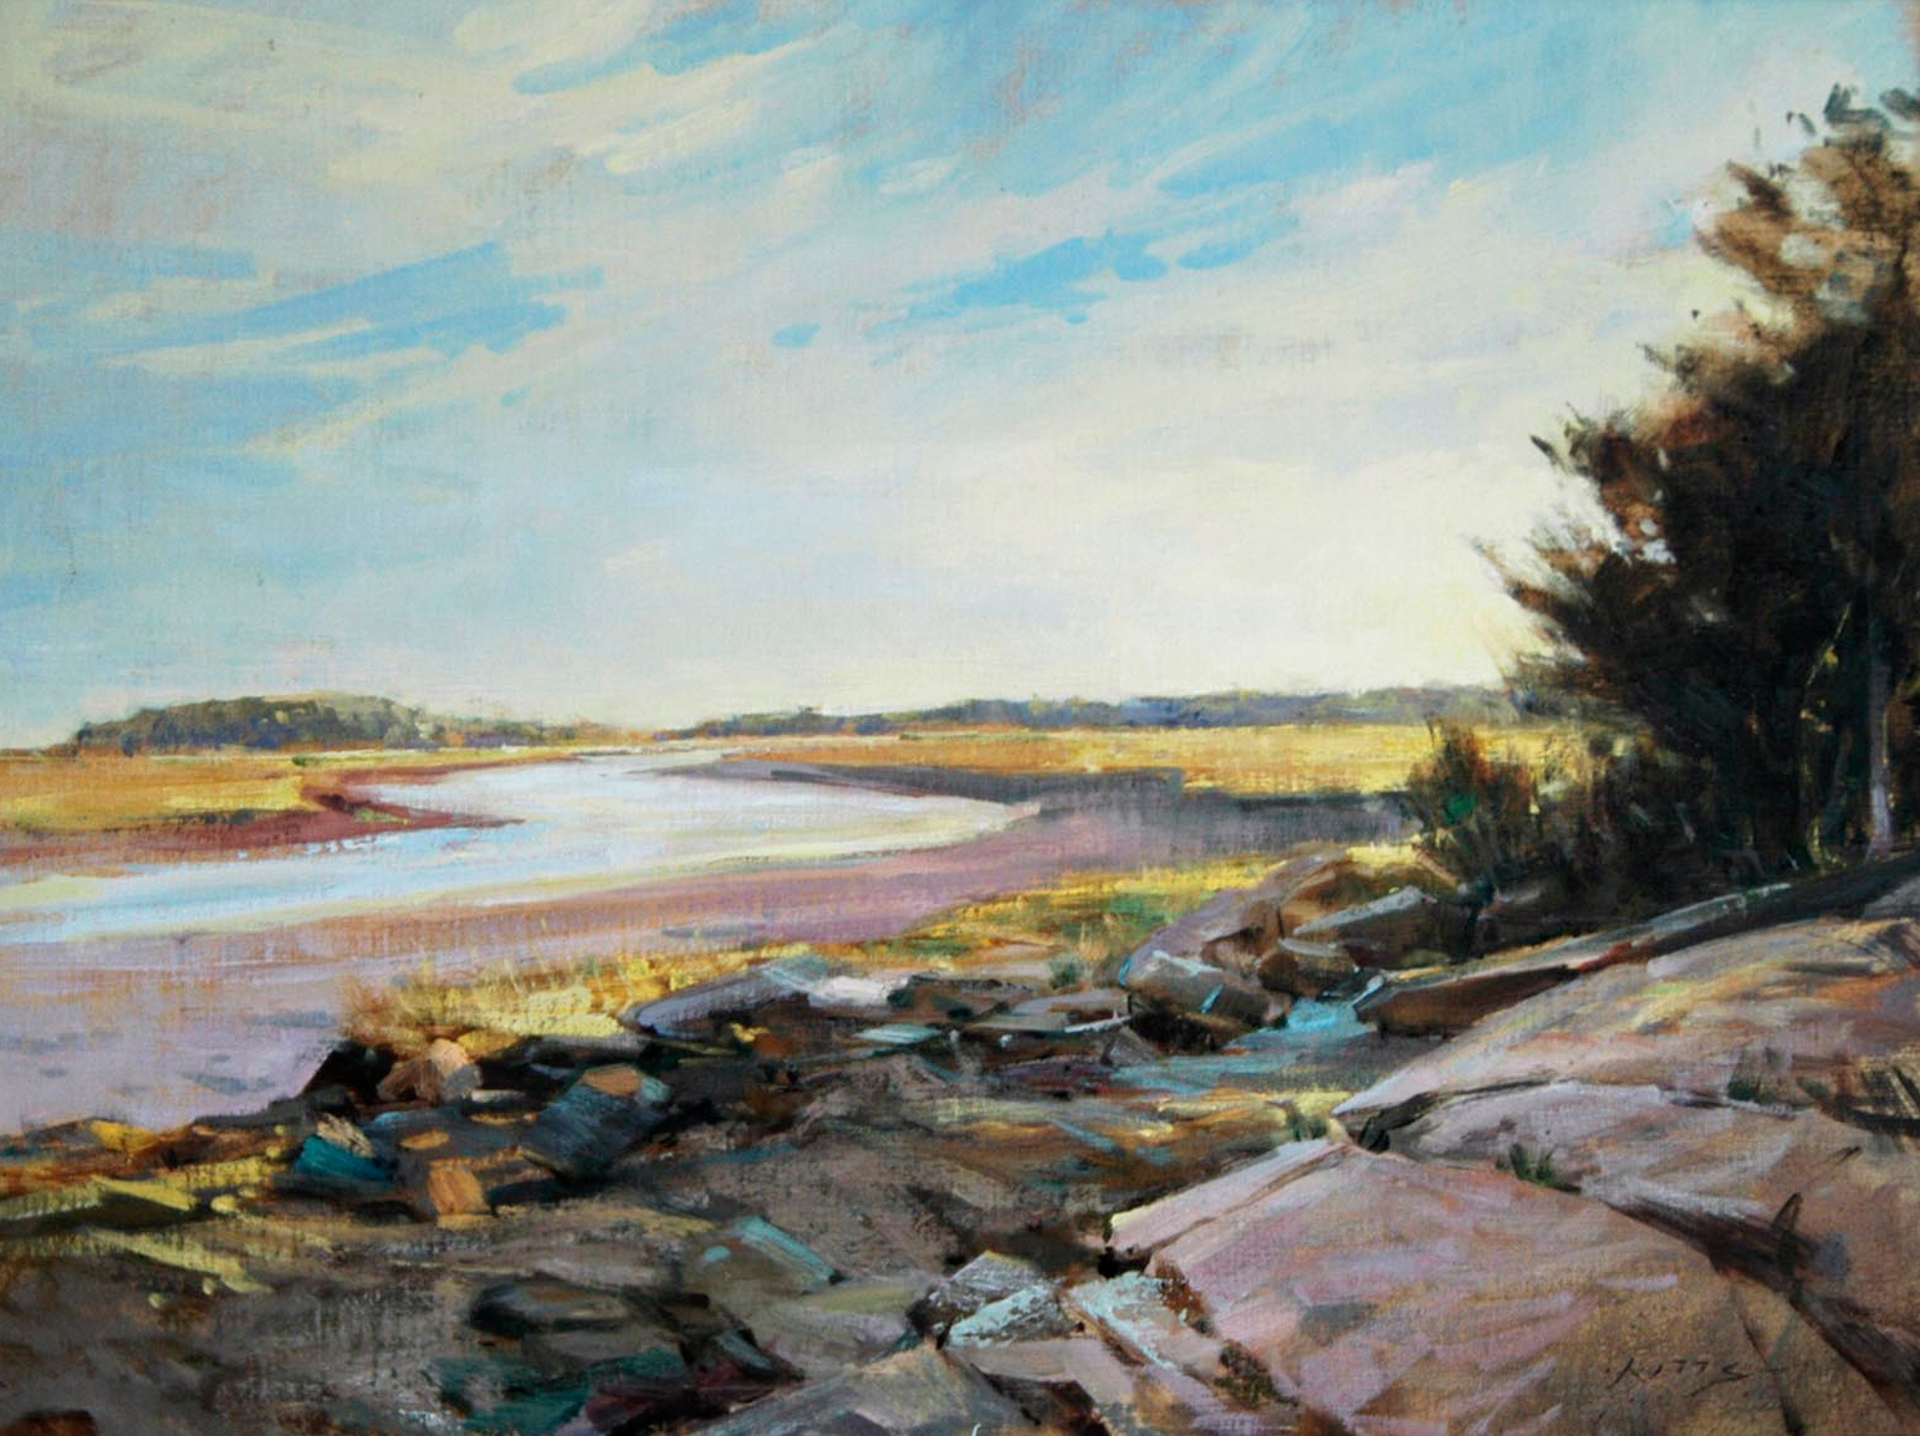 Morning on Billy's Point - Essex by Thomas Kitts